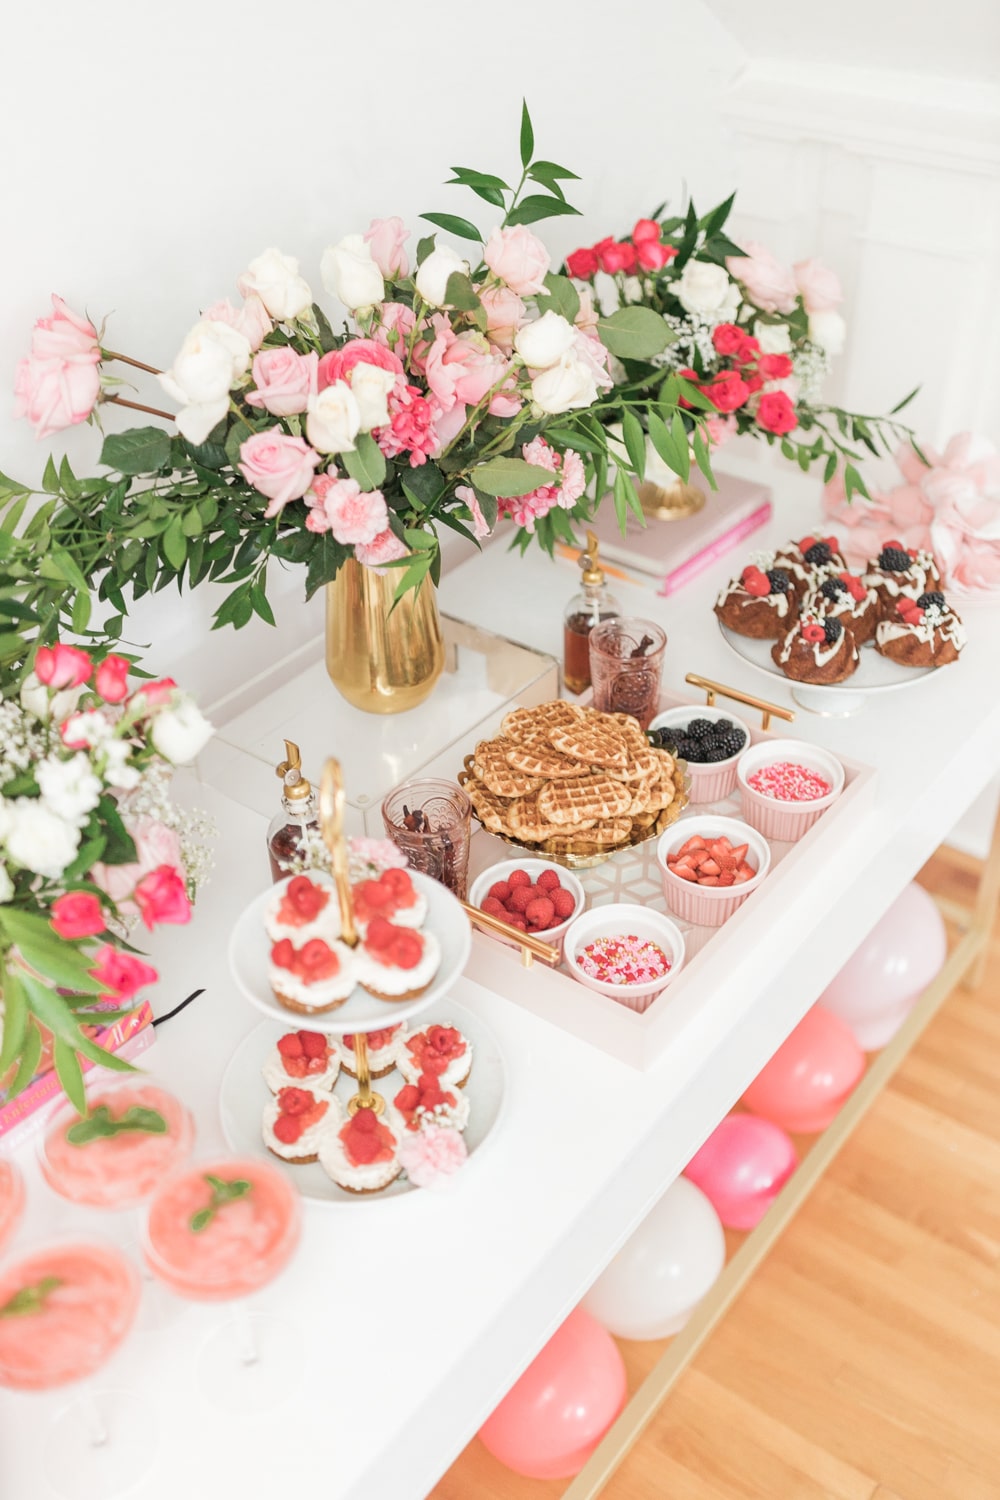 Galentine's Day brunch menu created by blogger Stephanie Ziajka on Diary of a Debutante